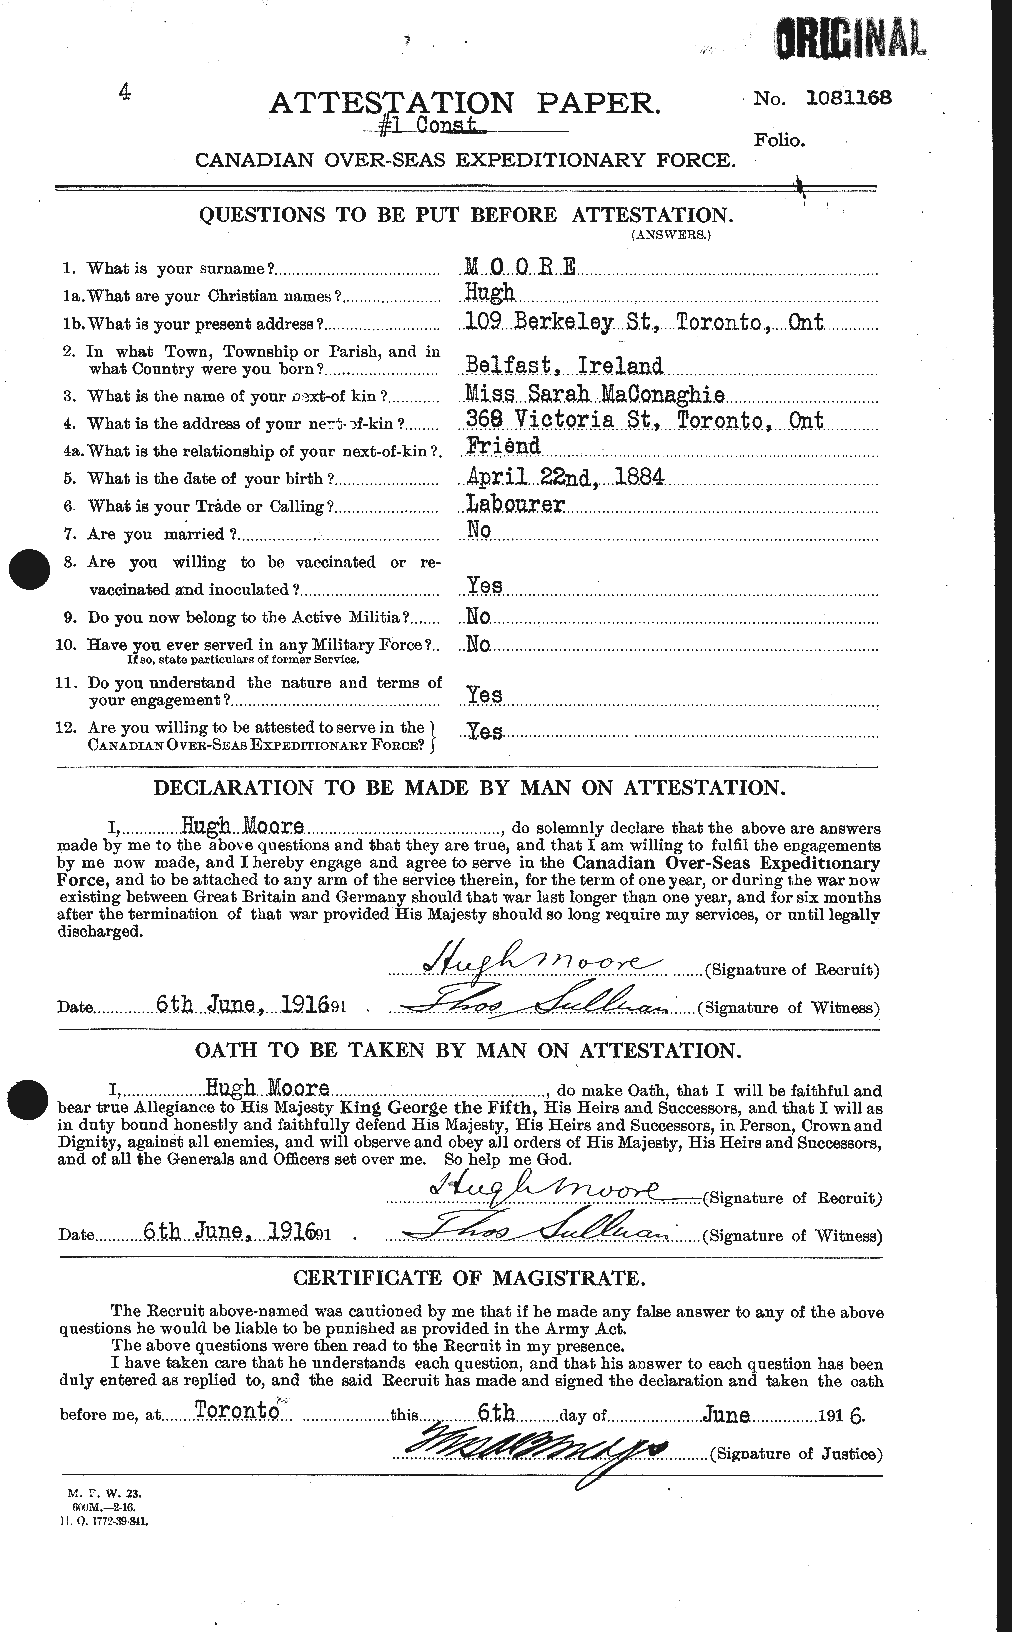 Personnel Records of the First World War - CEF 502143a